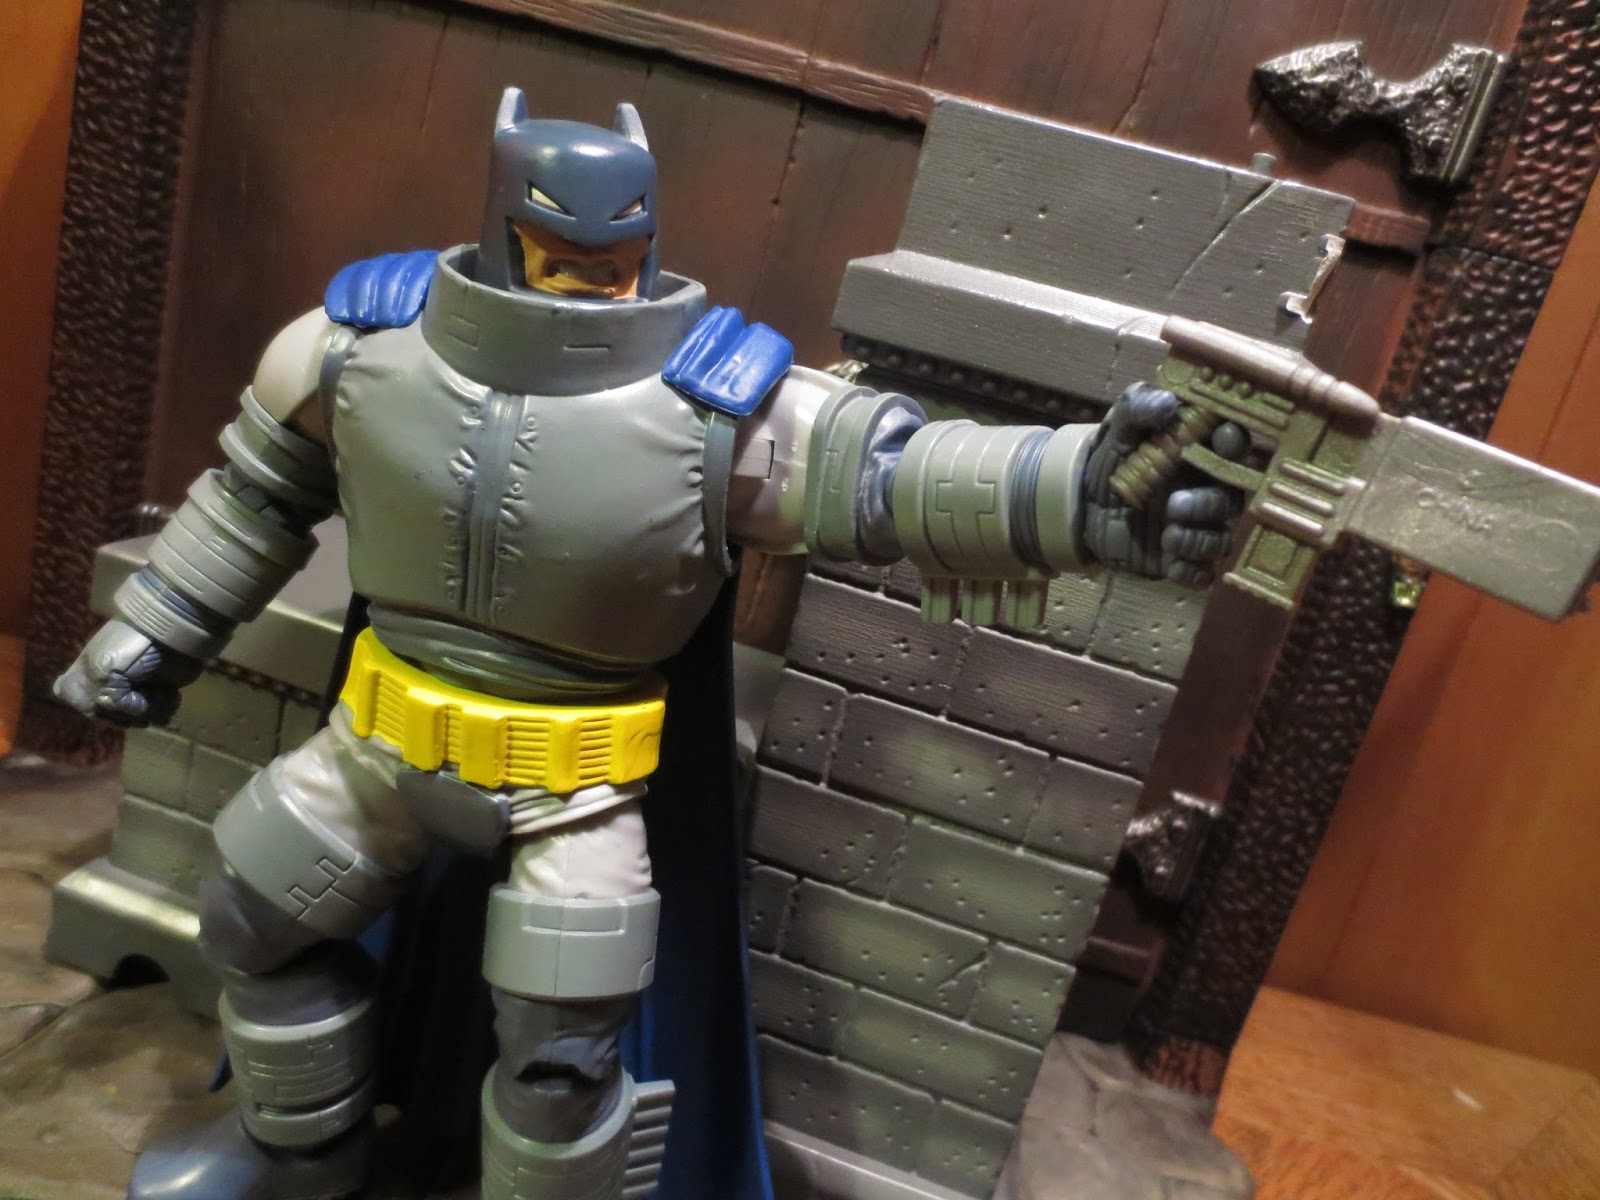 Action Figure Barbecue: Action Figure Review: Armored Batman (The Dark  Knight Returns) from DC Comics Multiverse by Mattel